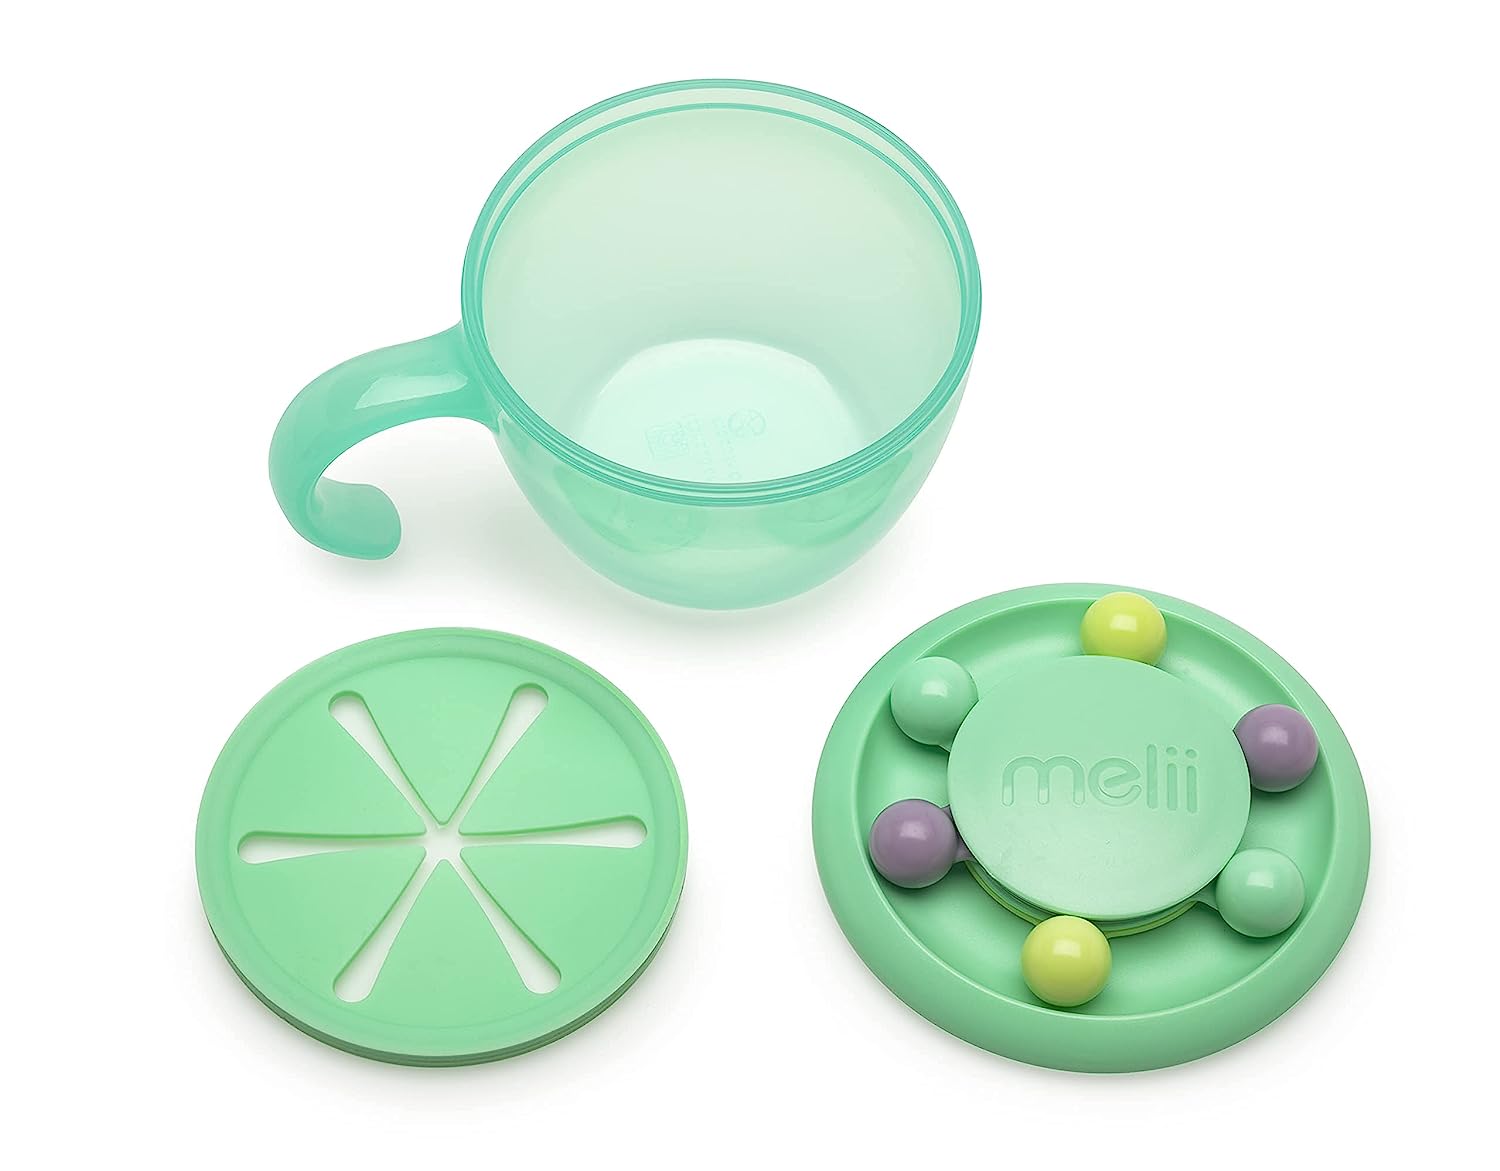 Melii Abacus Snack Container with lid - Mint.